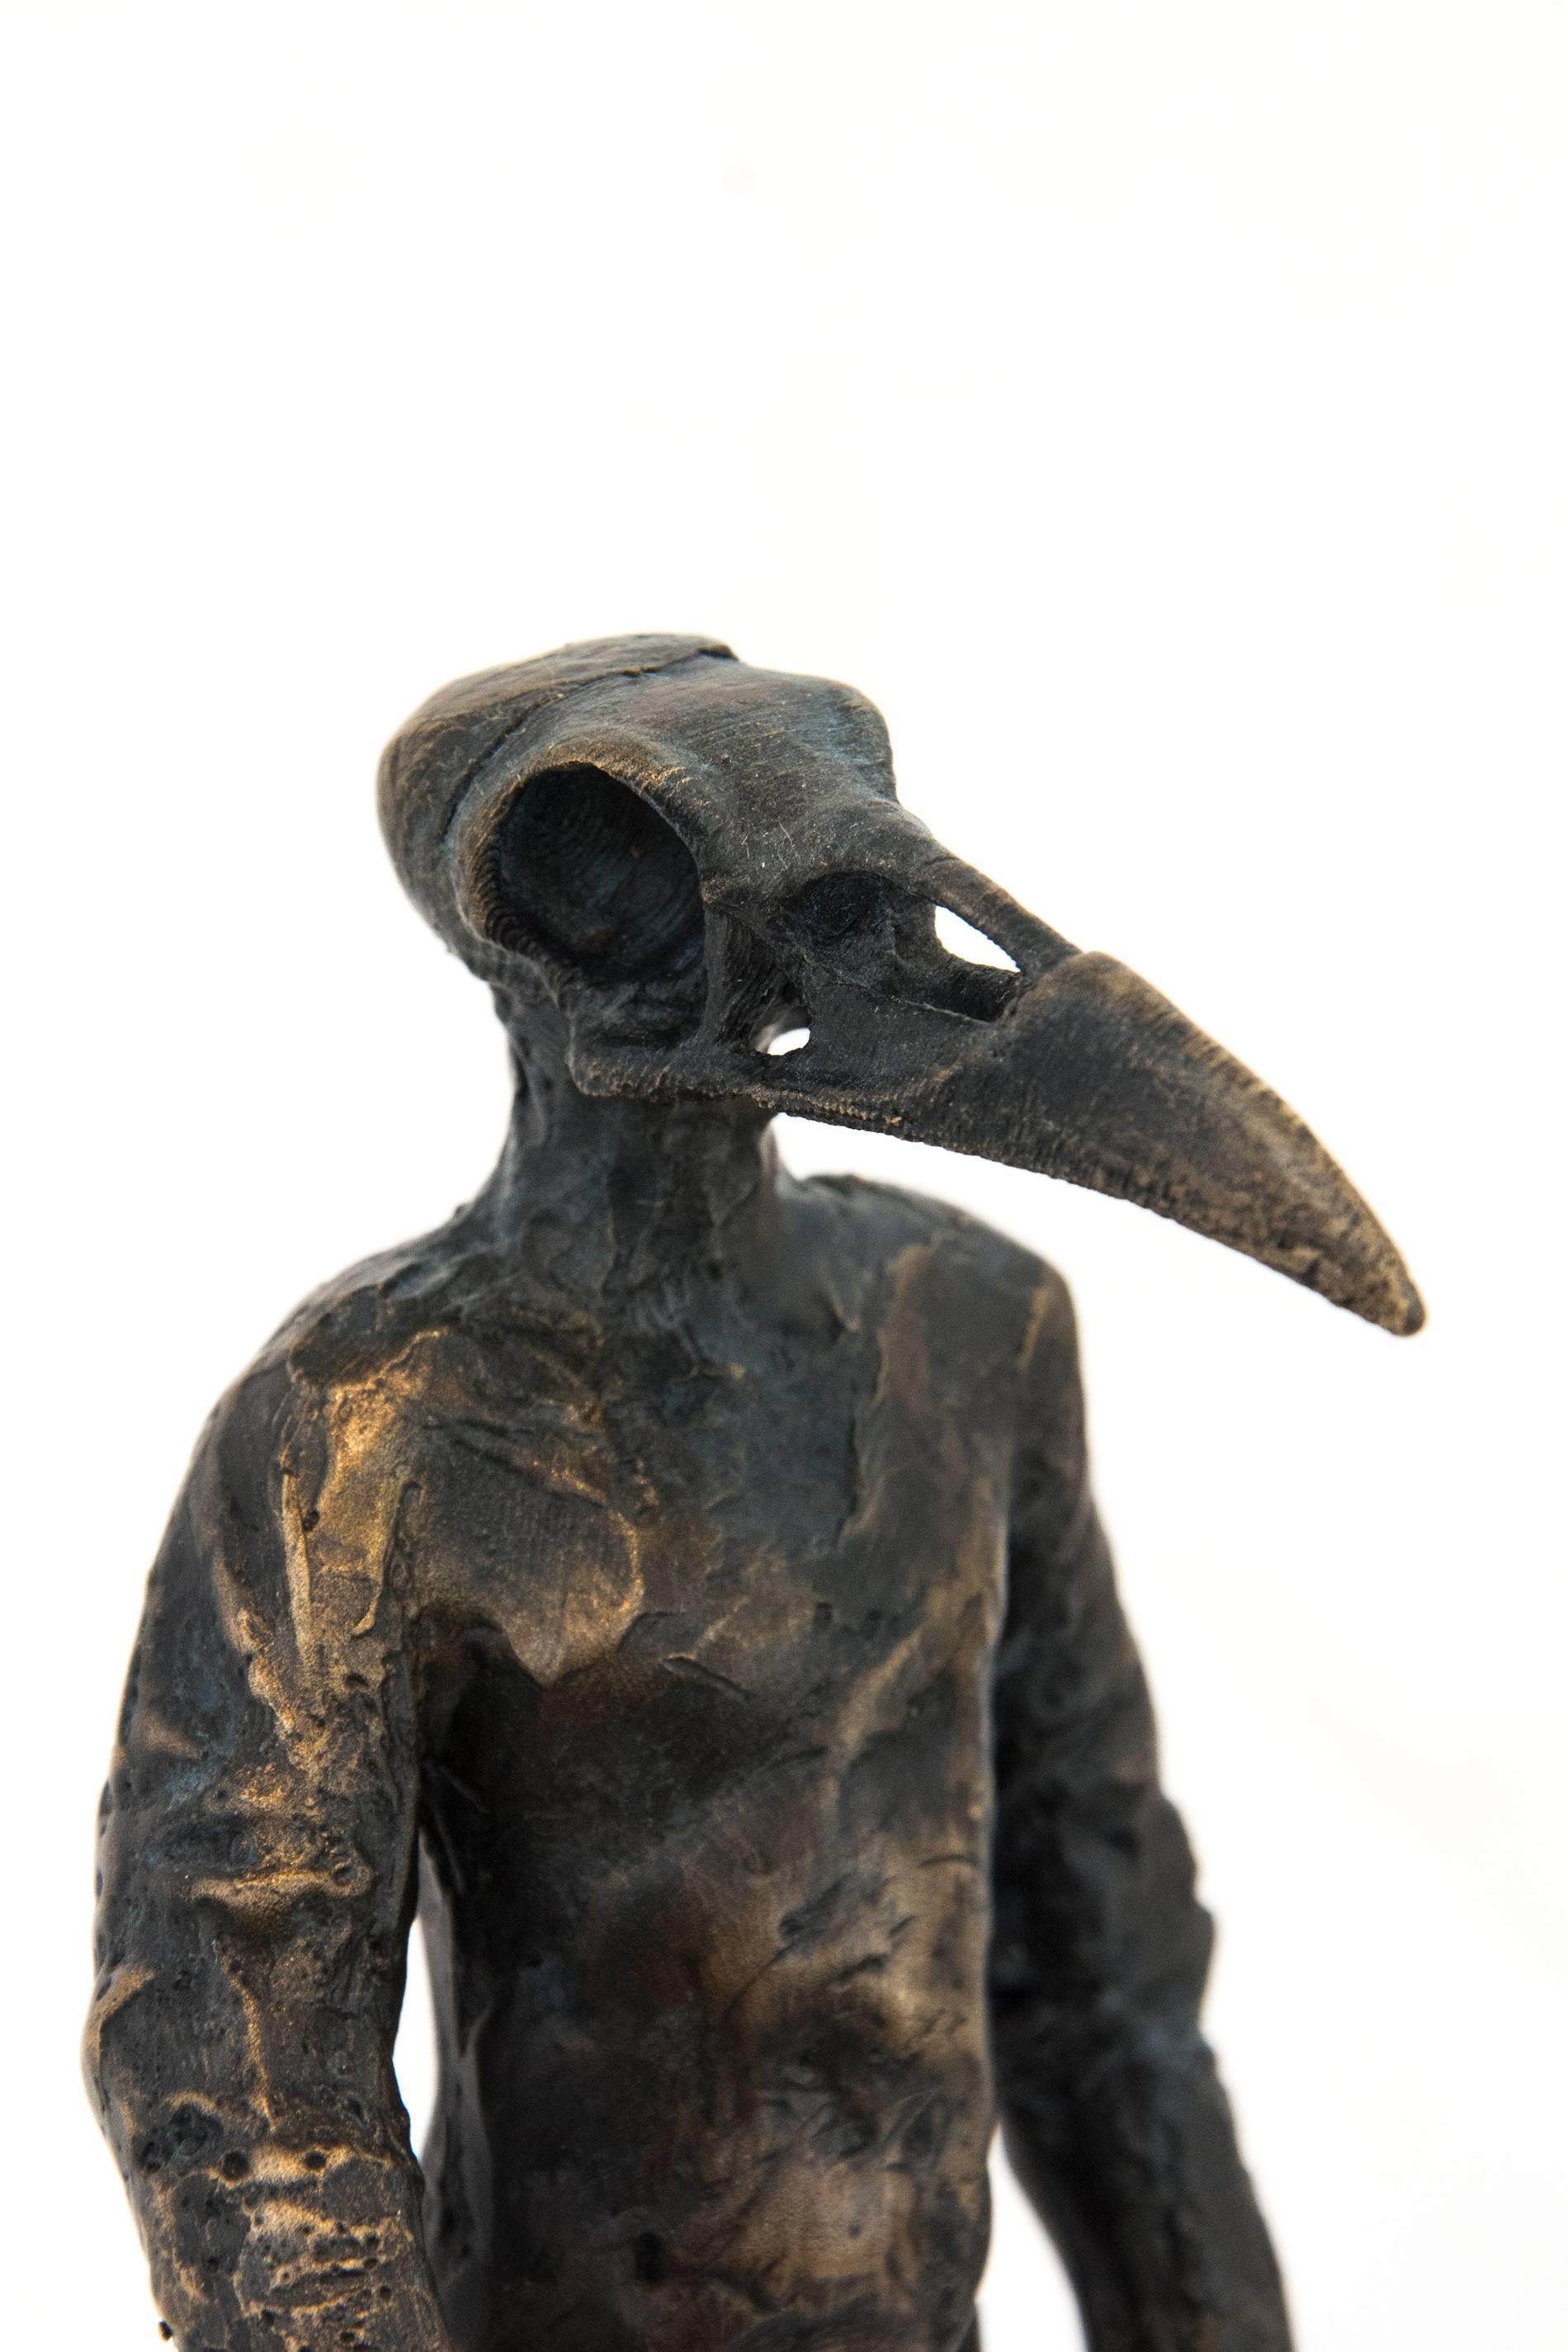 Ravenskull: Contemplation of a Possible Take-Off - figurative, bronze sculpture - Sculpture by Roch Smith